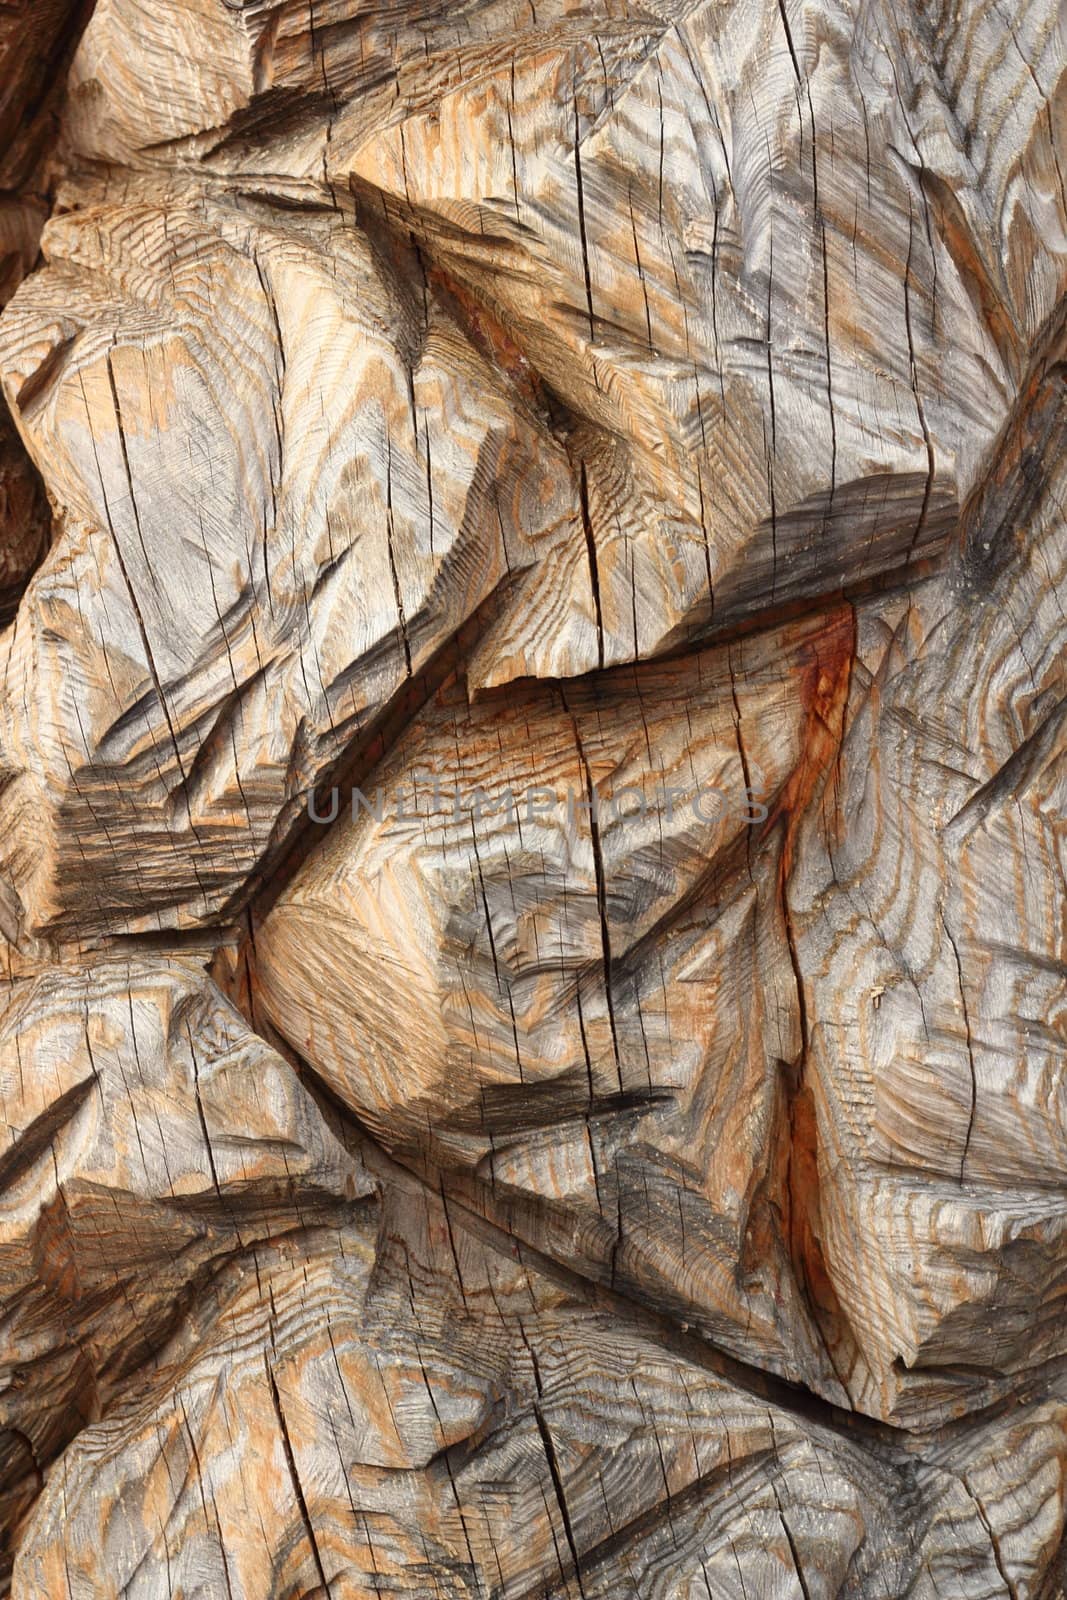 carved wood texture - detail on a wooden sculpture